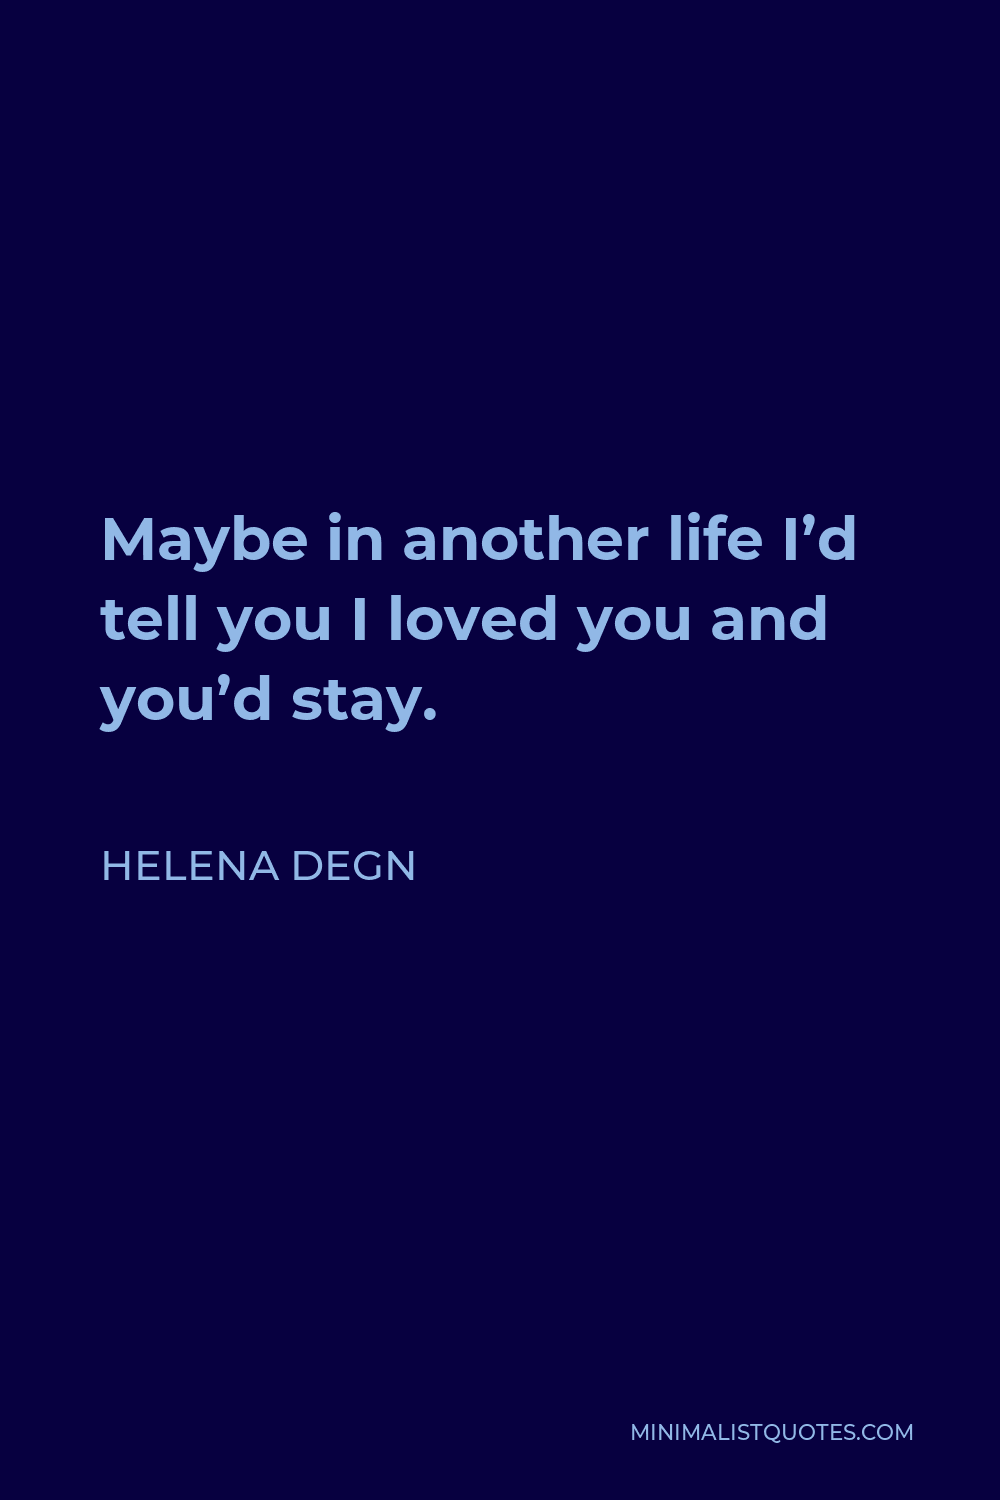 Helena Degn Quote - Maybe in another life I’d tell you I loved you and you’d stay.